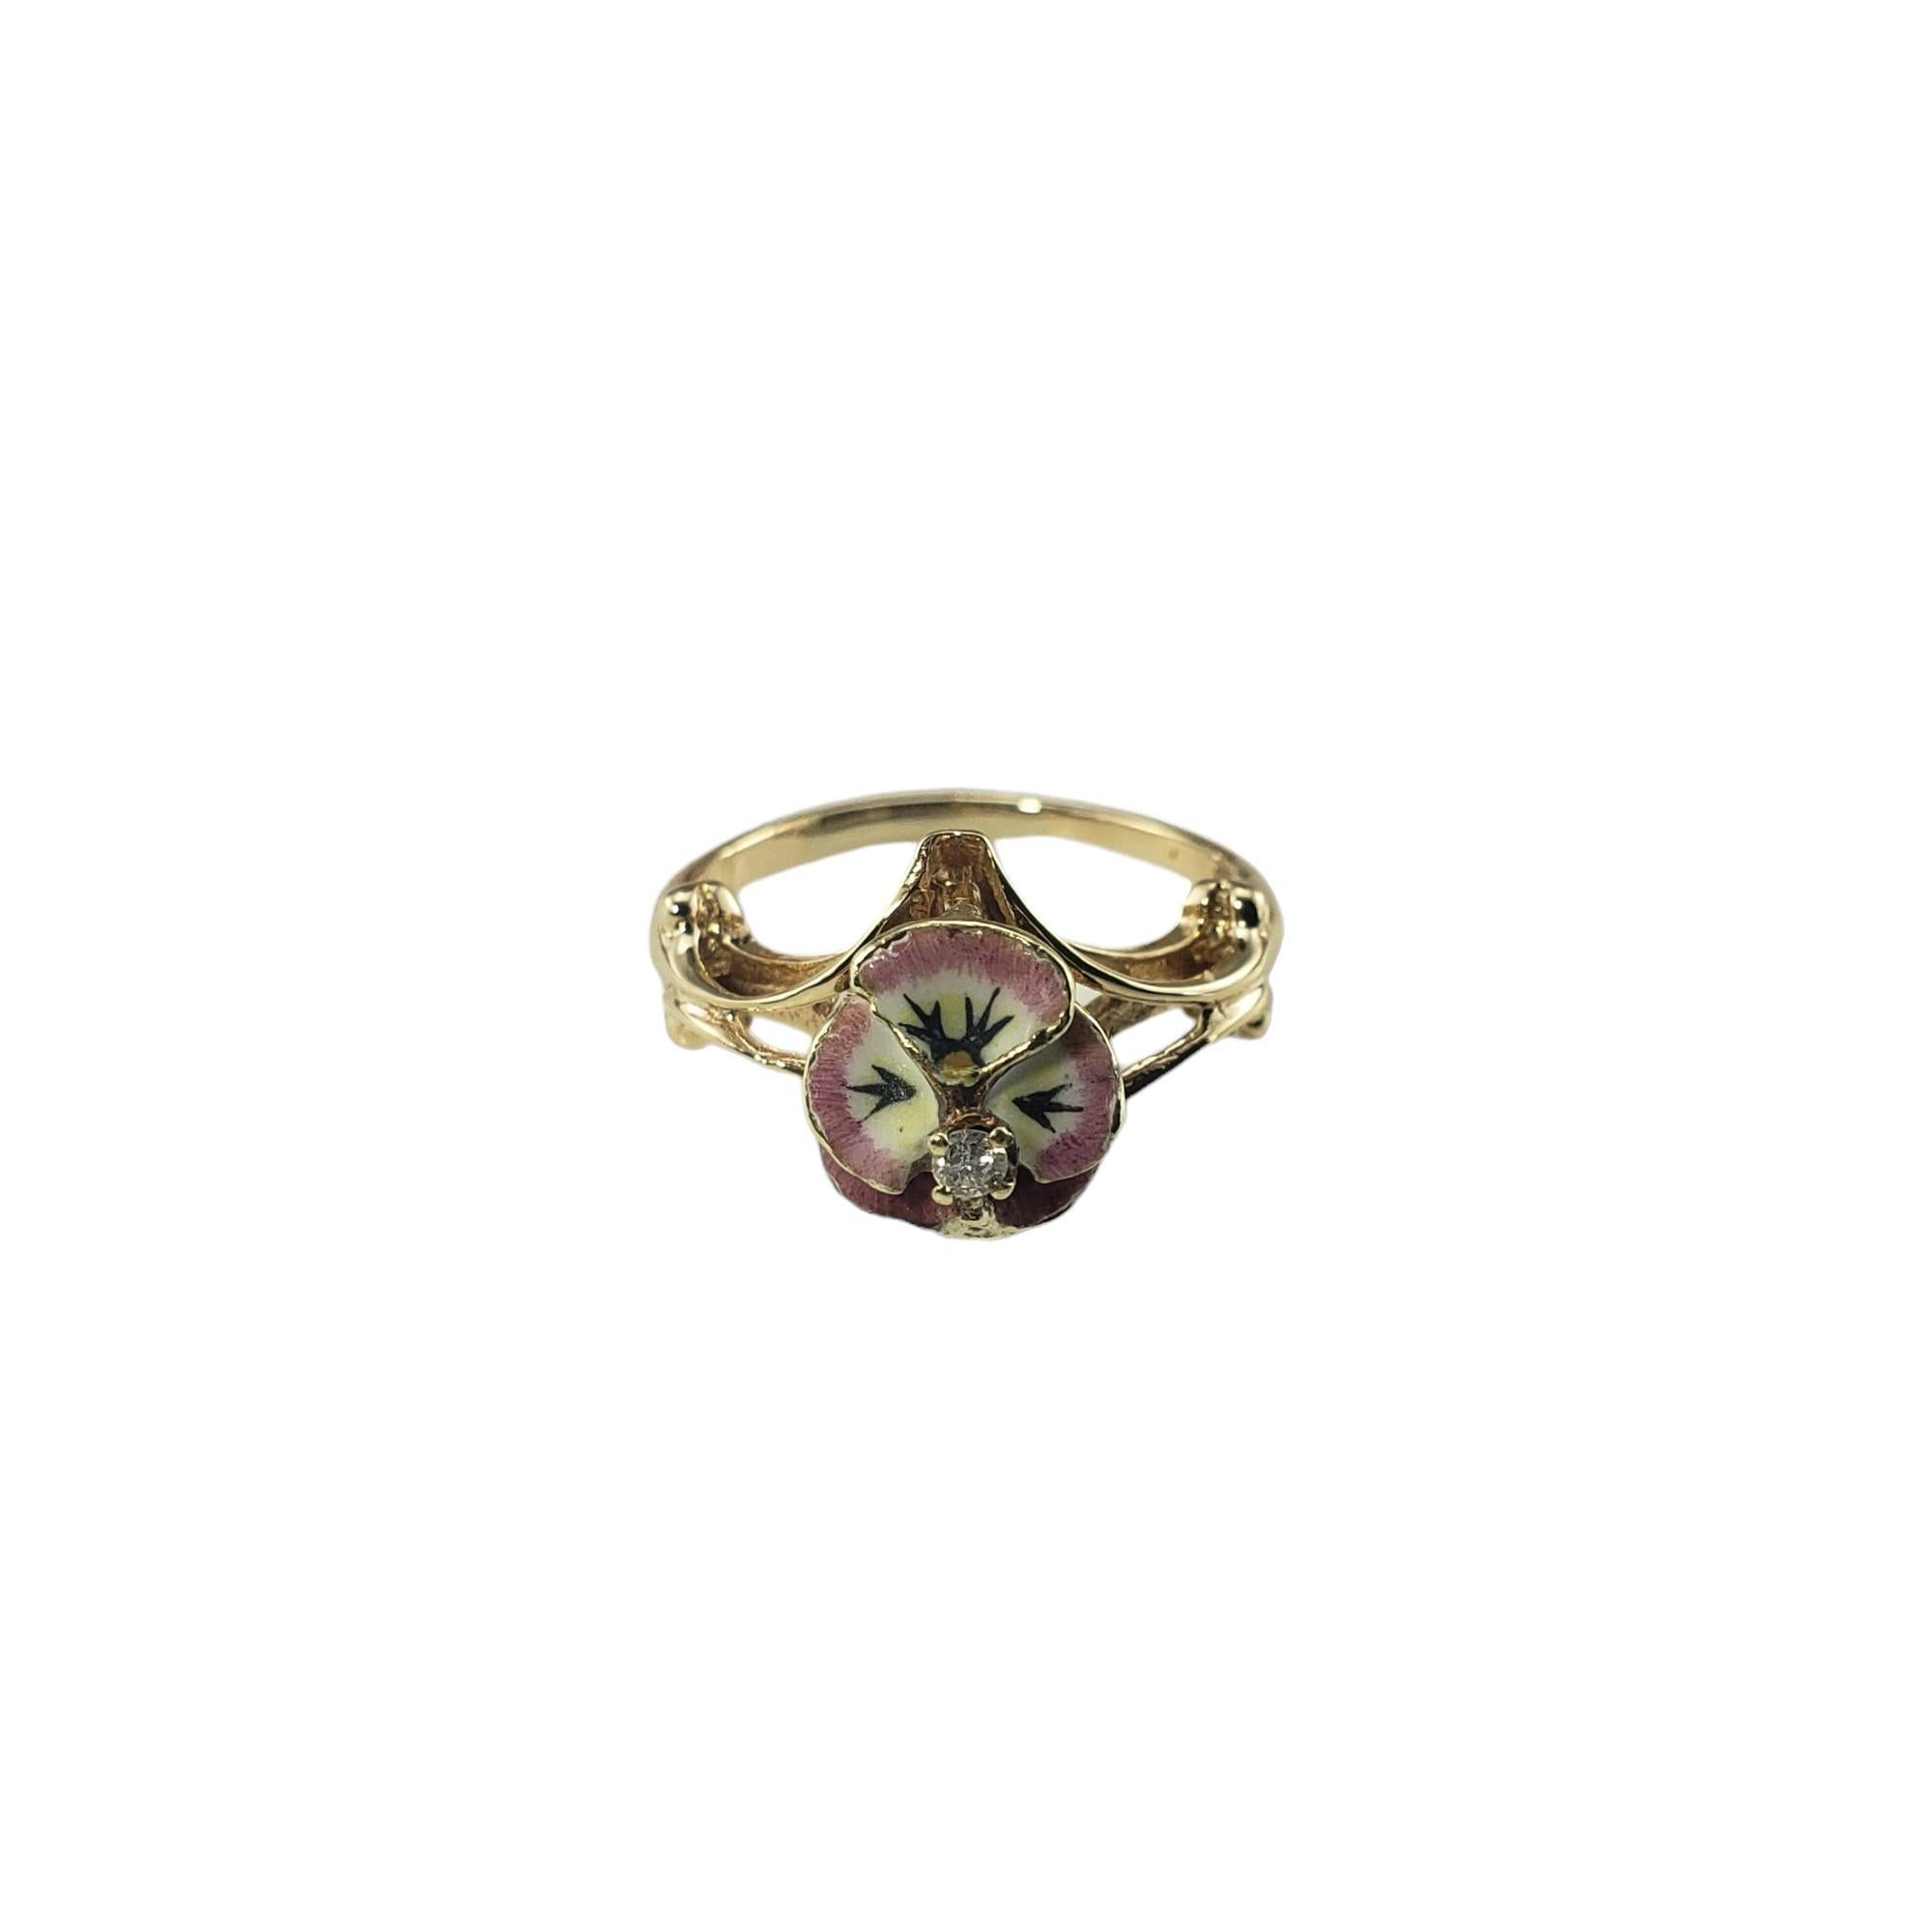 14 Karat Yellow Gold and Diamond Enamel Floral Ring Size 5.75-

This stunning ring features a lovely orchid accented with pink enamel and one round brilliant cut diamond.  Set in classic 14K yellow gold.  Width:  12 mm.
Shank: 1.5 mm.

Approximate